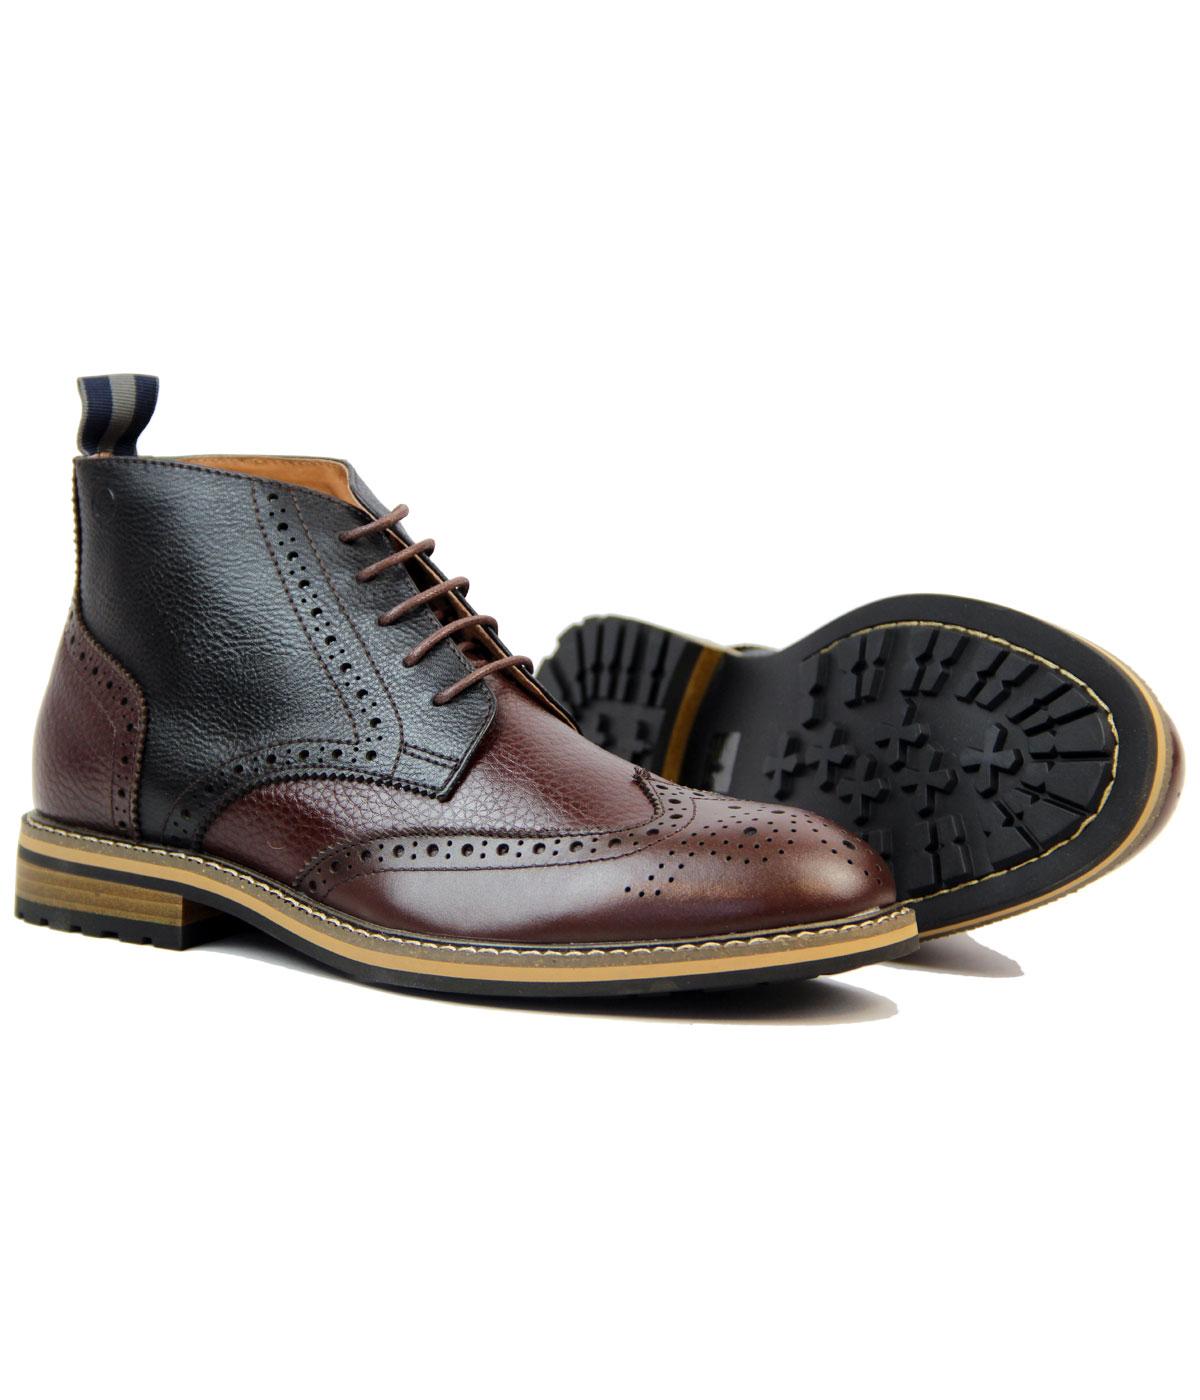 PETER WERTH Turnmill Leather Brogue Chukka Boots in Black/Choc